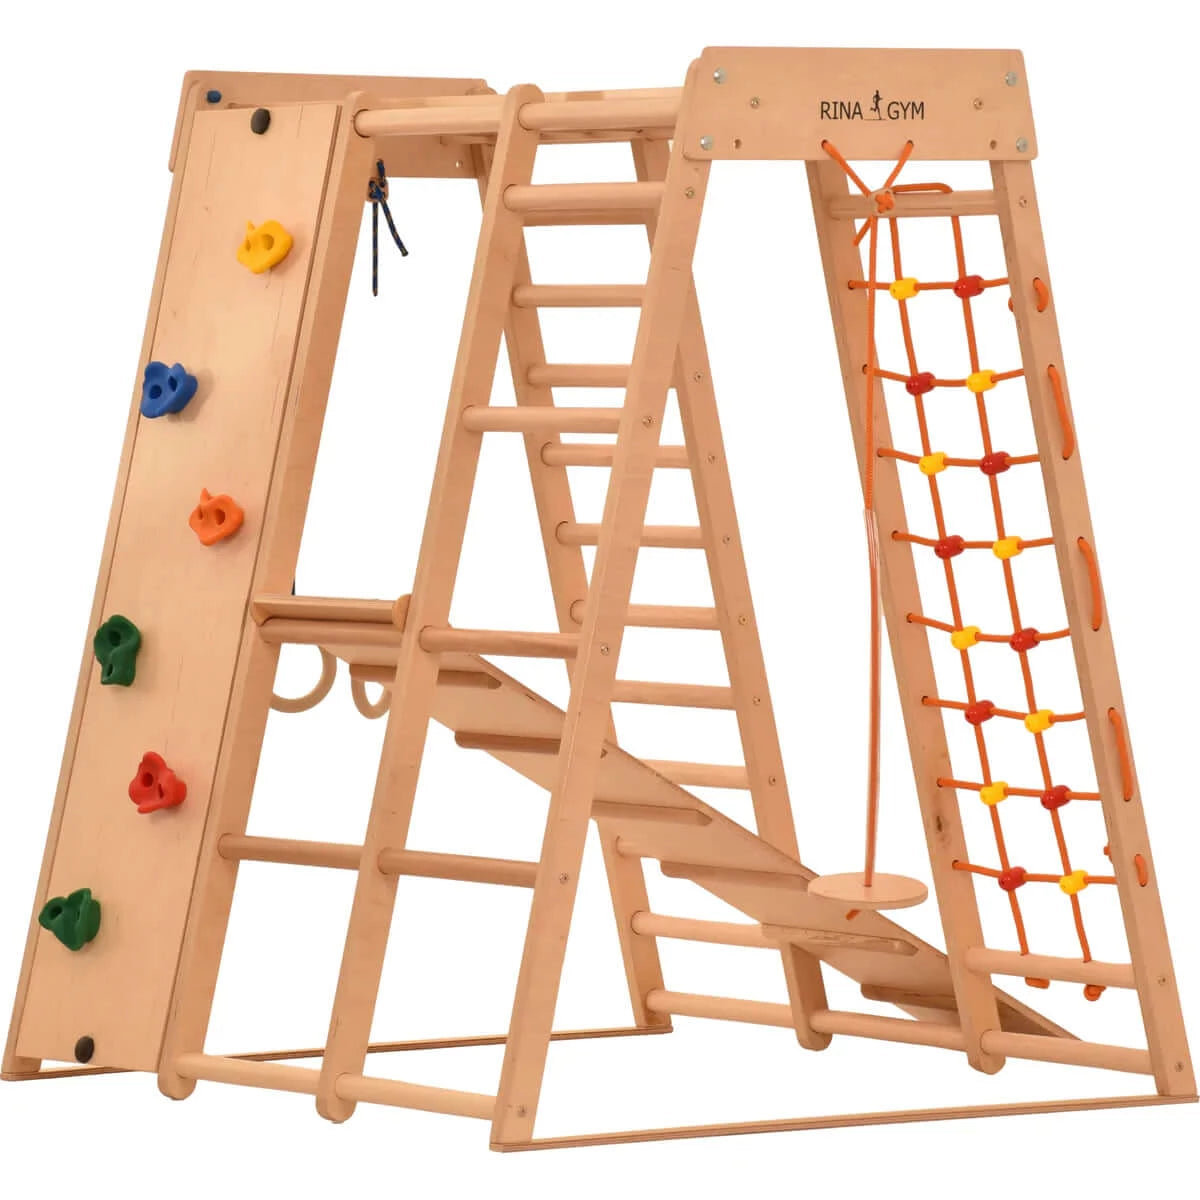 Indoor playground - Kids Playtime, different colors